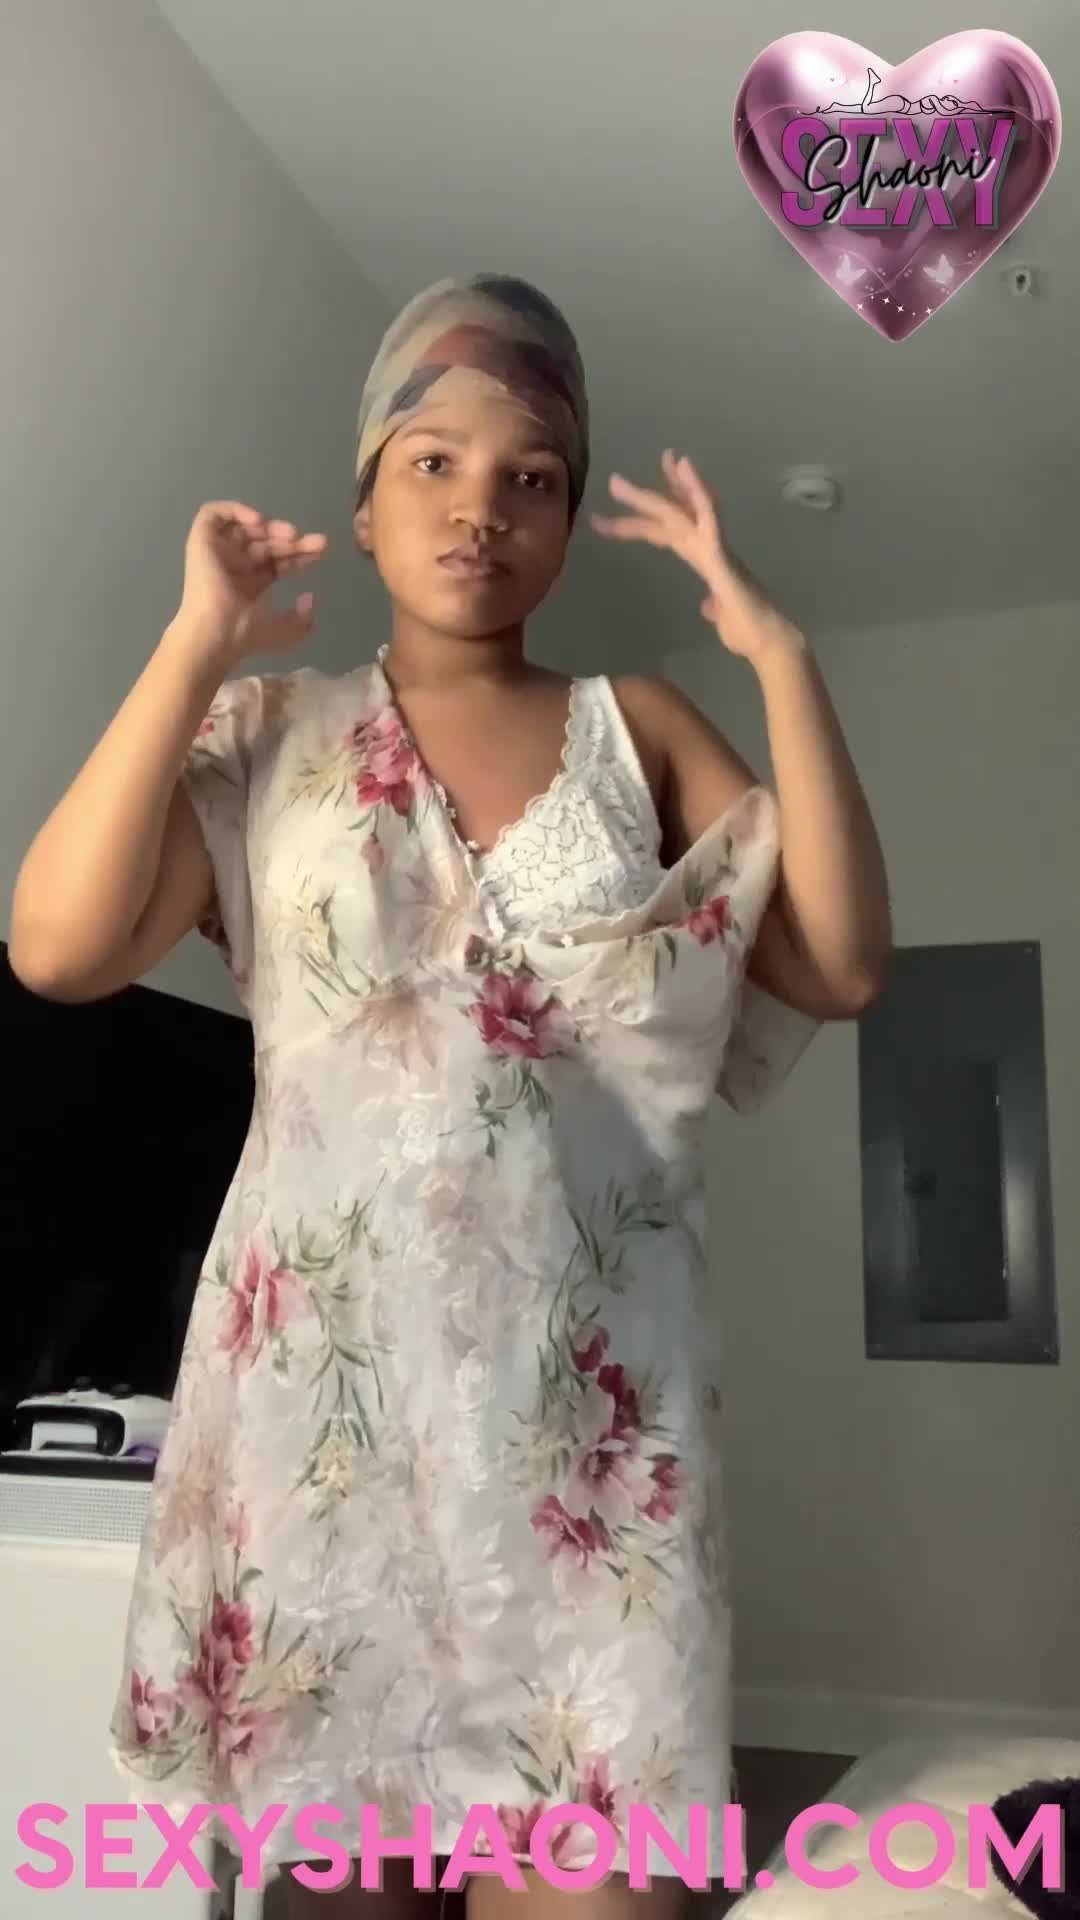 Video by hotfoxmedia1 with the username @hotfoxmedia1, who is a brand user,  April 3, 2024 at 12:55 PM and the text says 'See full video from "Sexy Shaoni" by clicking this link: https://sexyshaoni.com/videos/2'